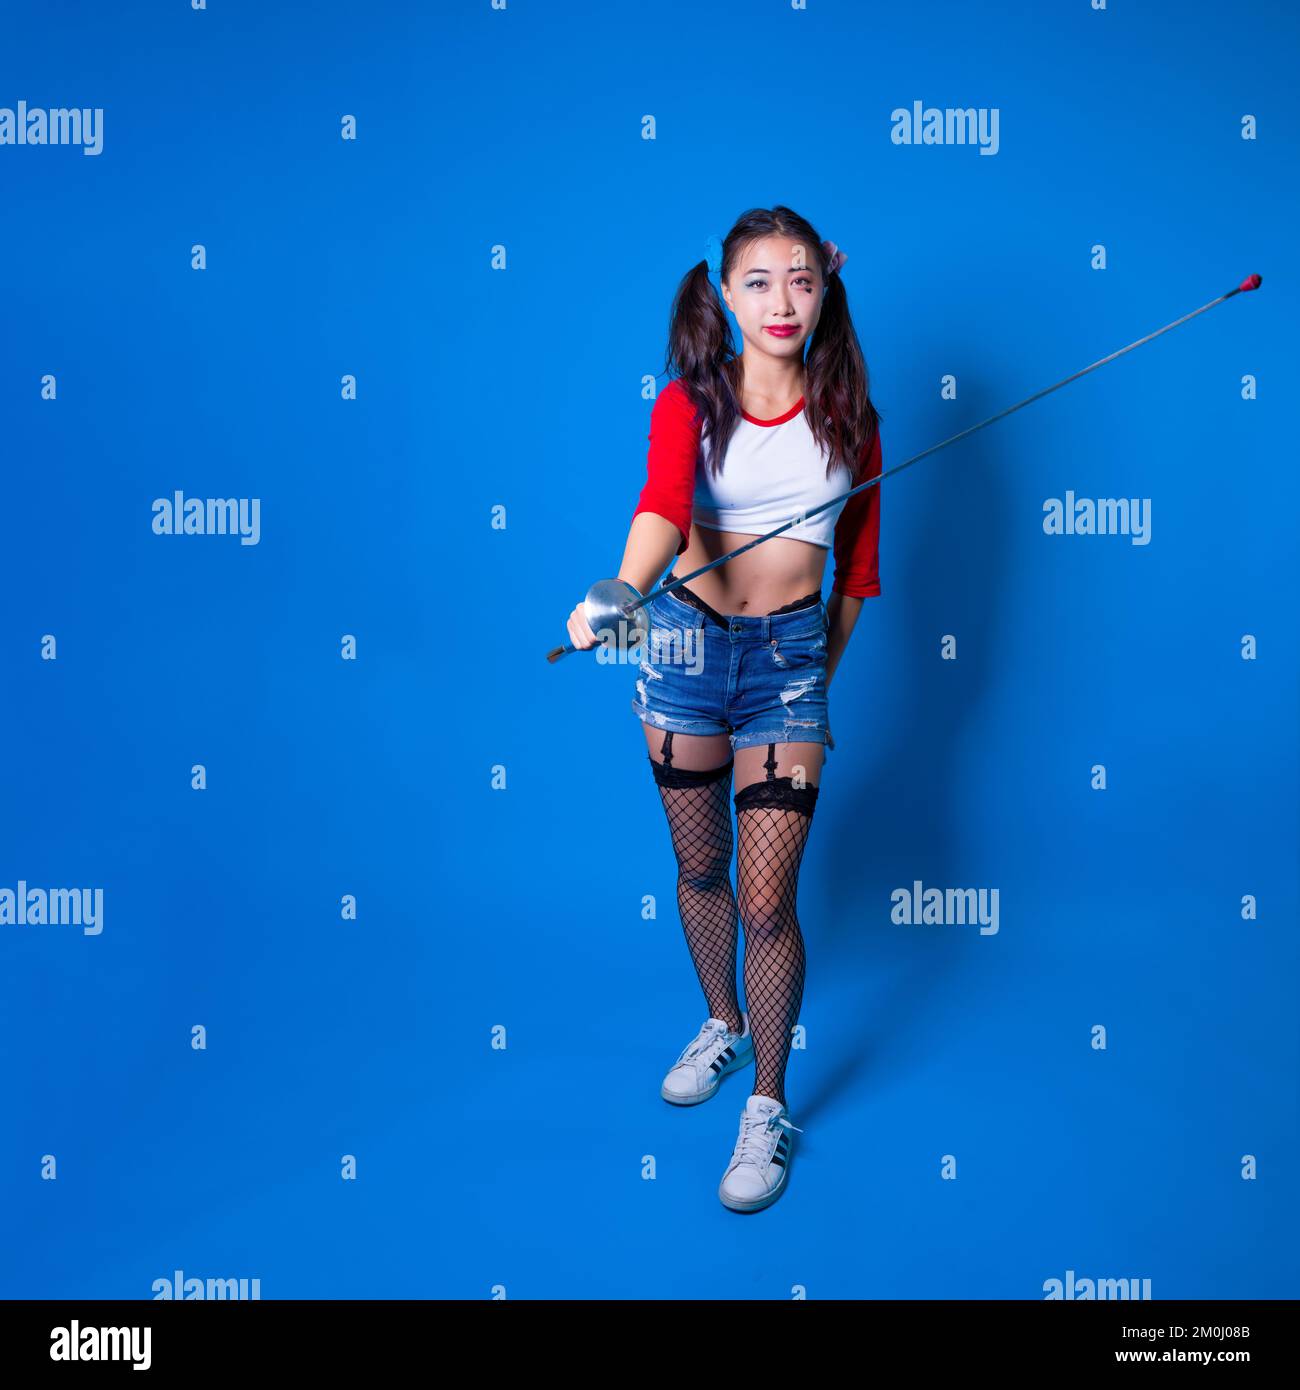 Young Woman in Harlequin Costume Holding Fencing Foil Against a Solid Blue Backdrop Stock Photo